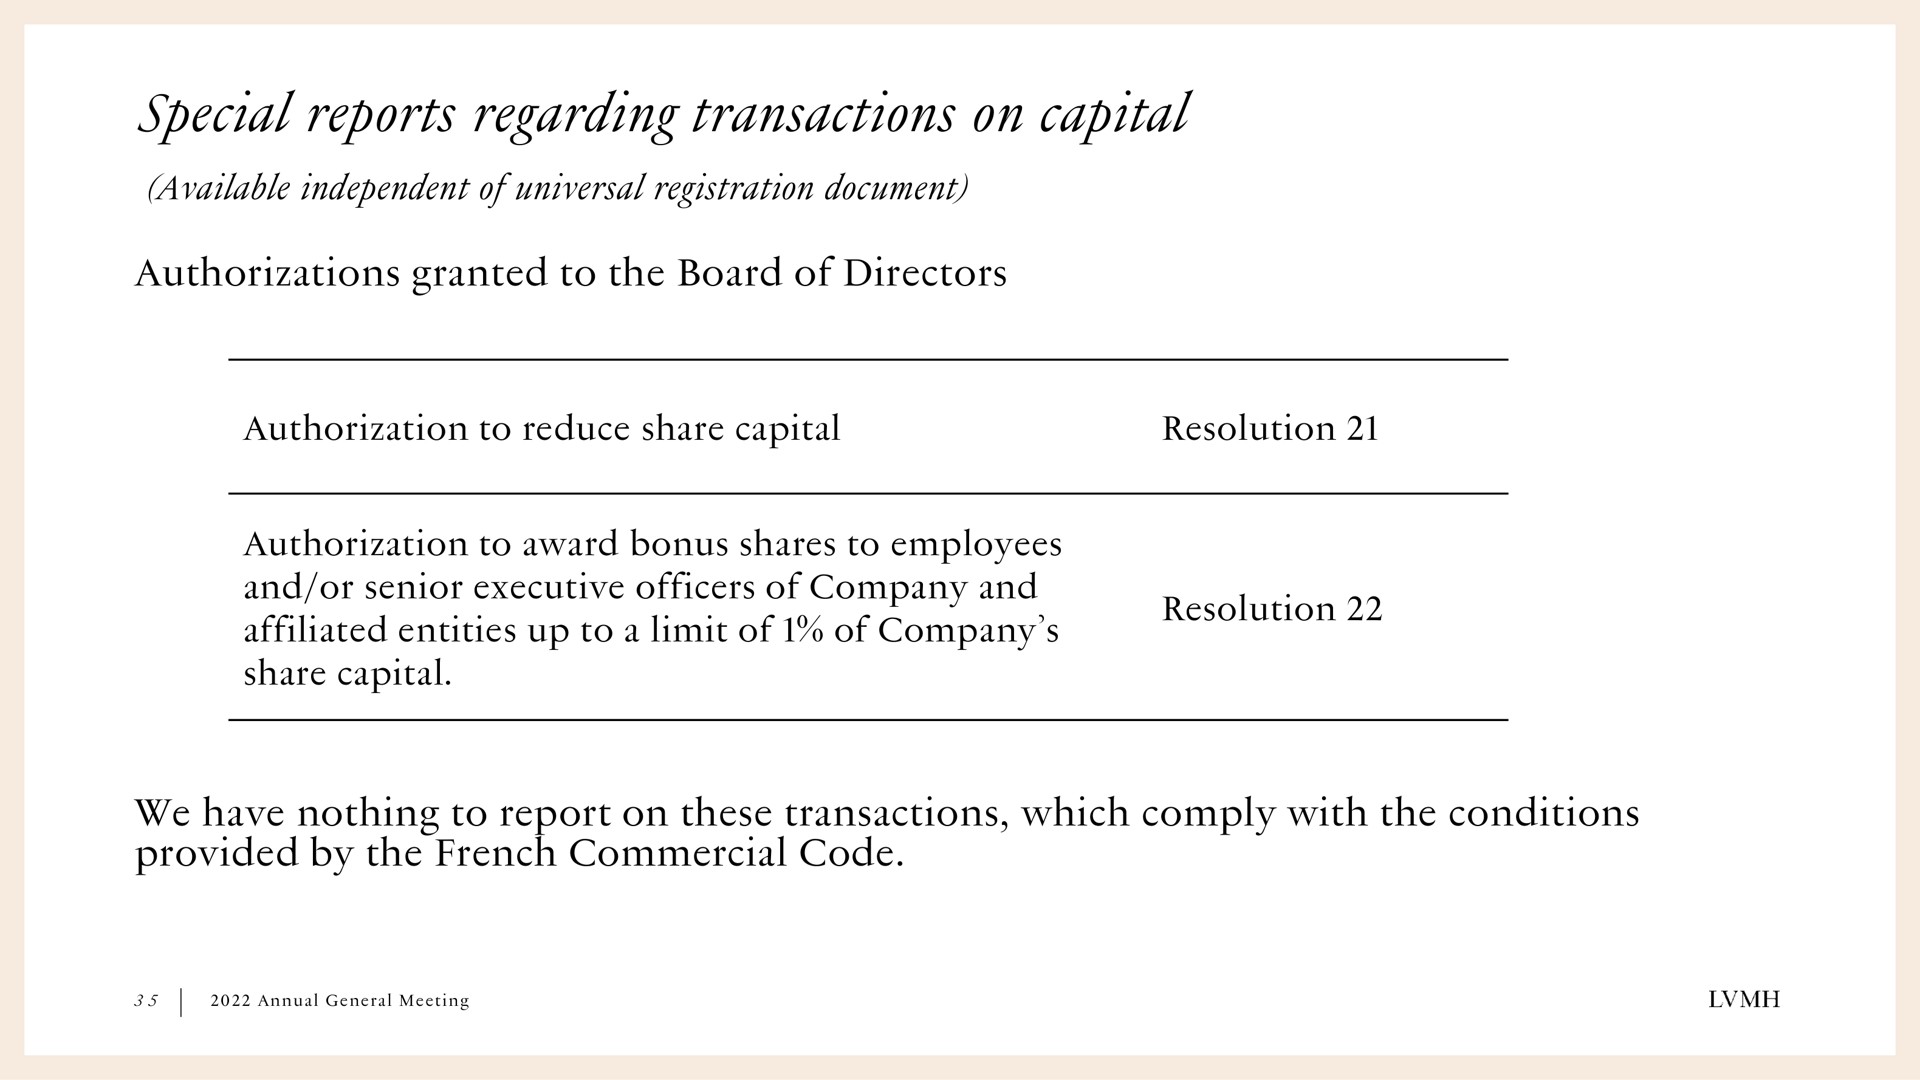 special reports regarding transactions on capital | LVMH